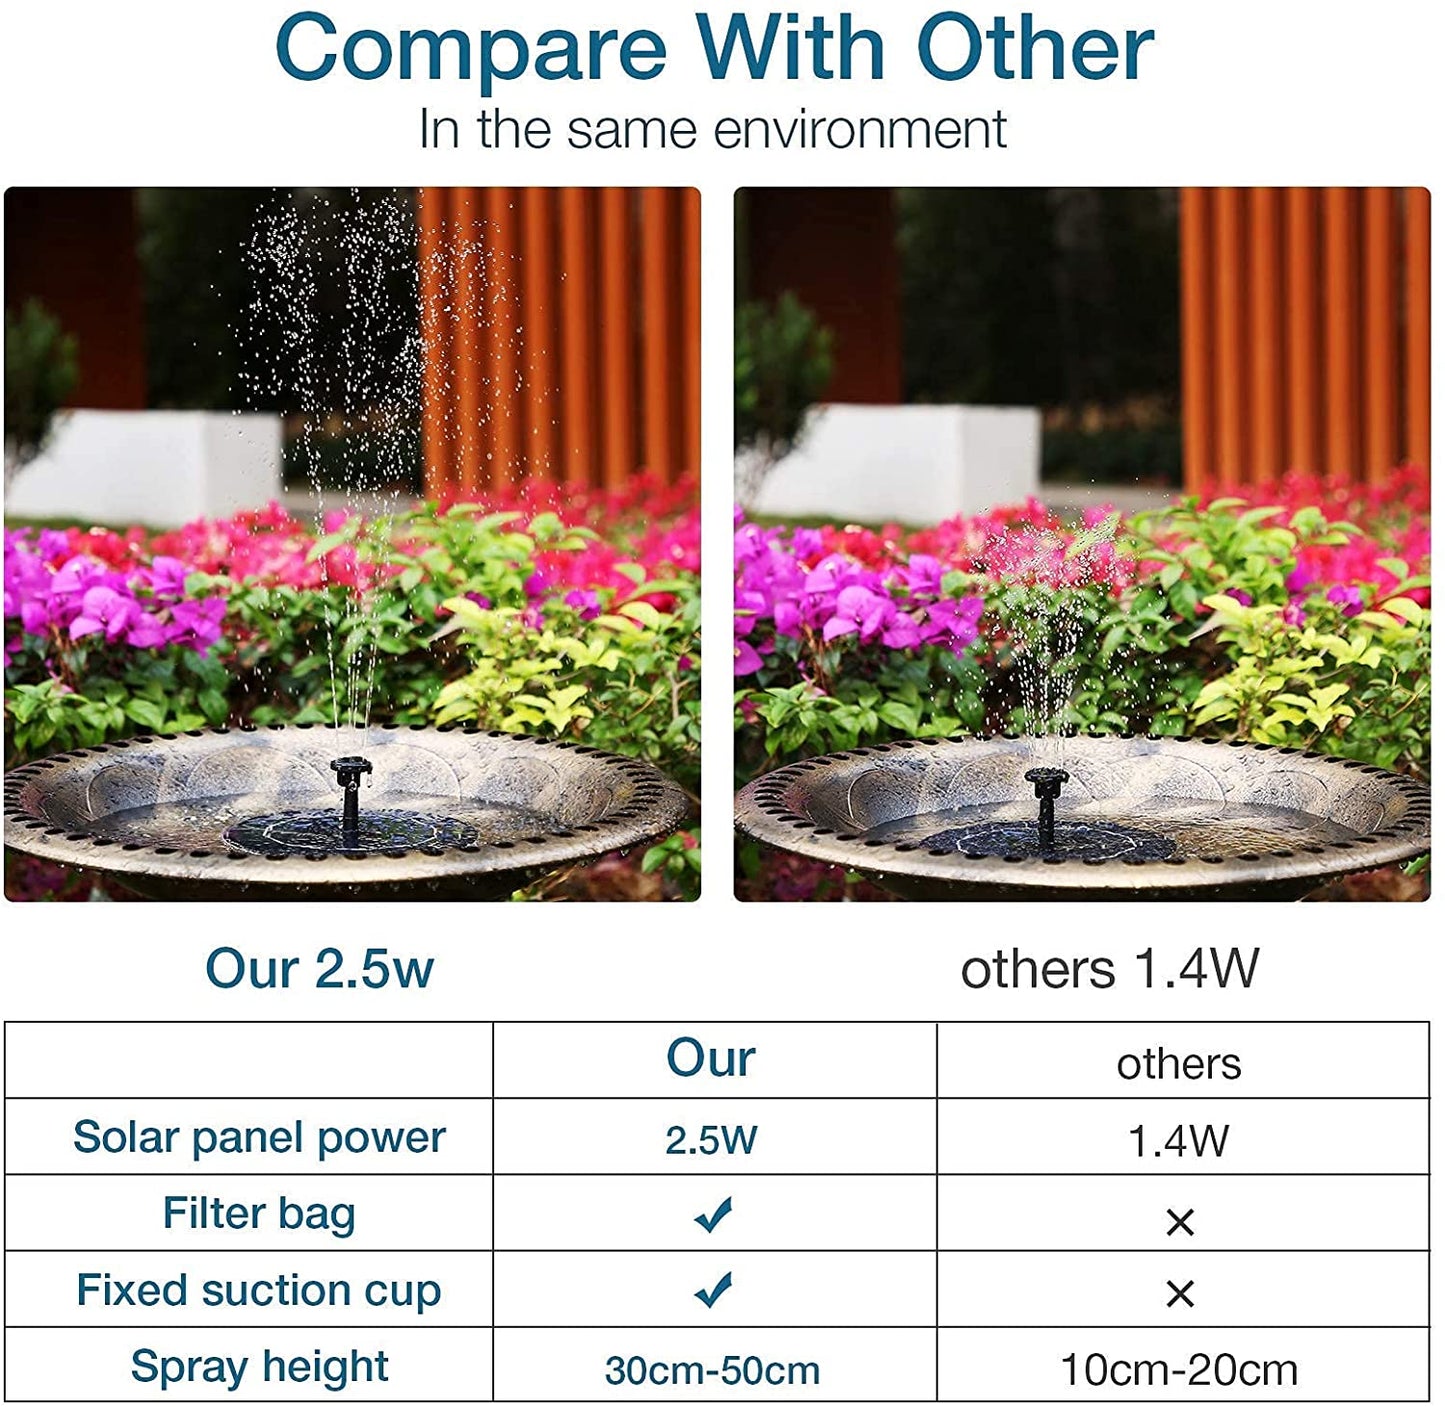 2.5W Solar Bird Bath Fountain, Compare With Other In the same environment Our 2.5w others 1.4W